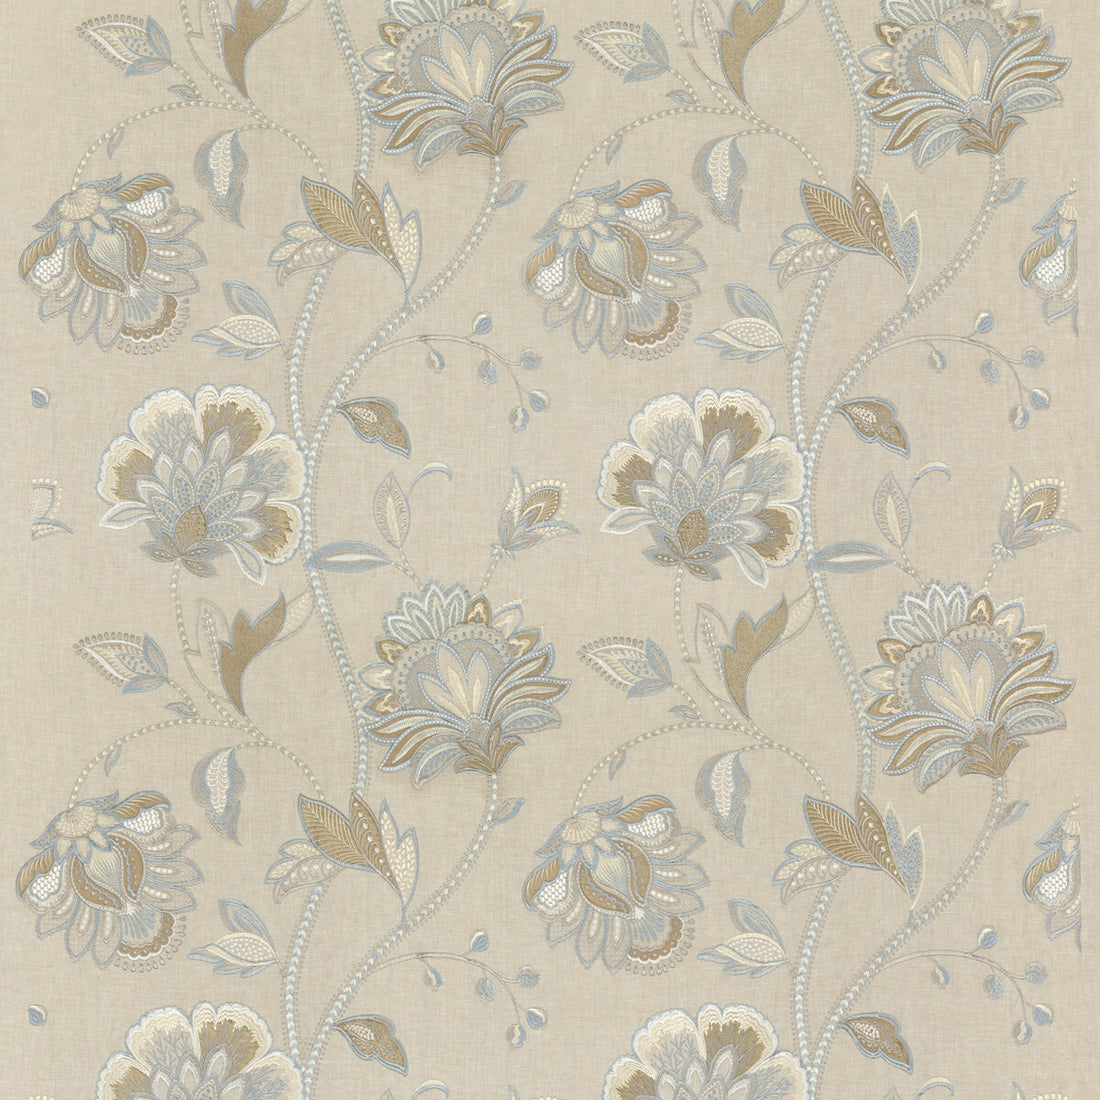 Ormesby fabric in soft blue color - pattern BF10762.3.0 - by G P &amp; J Baker in the Keswick Embroideries collection